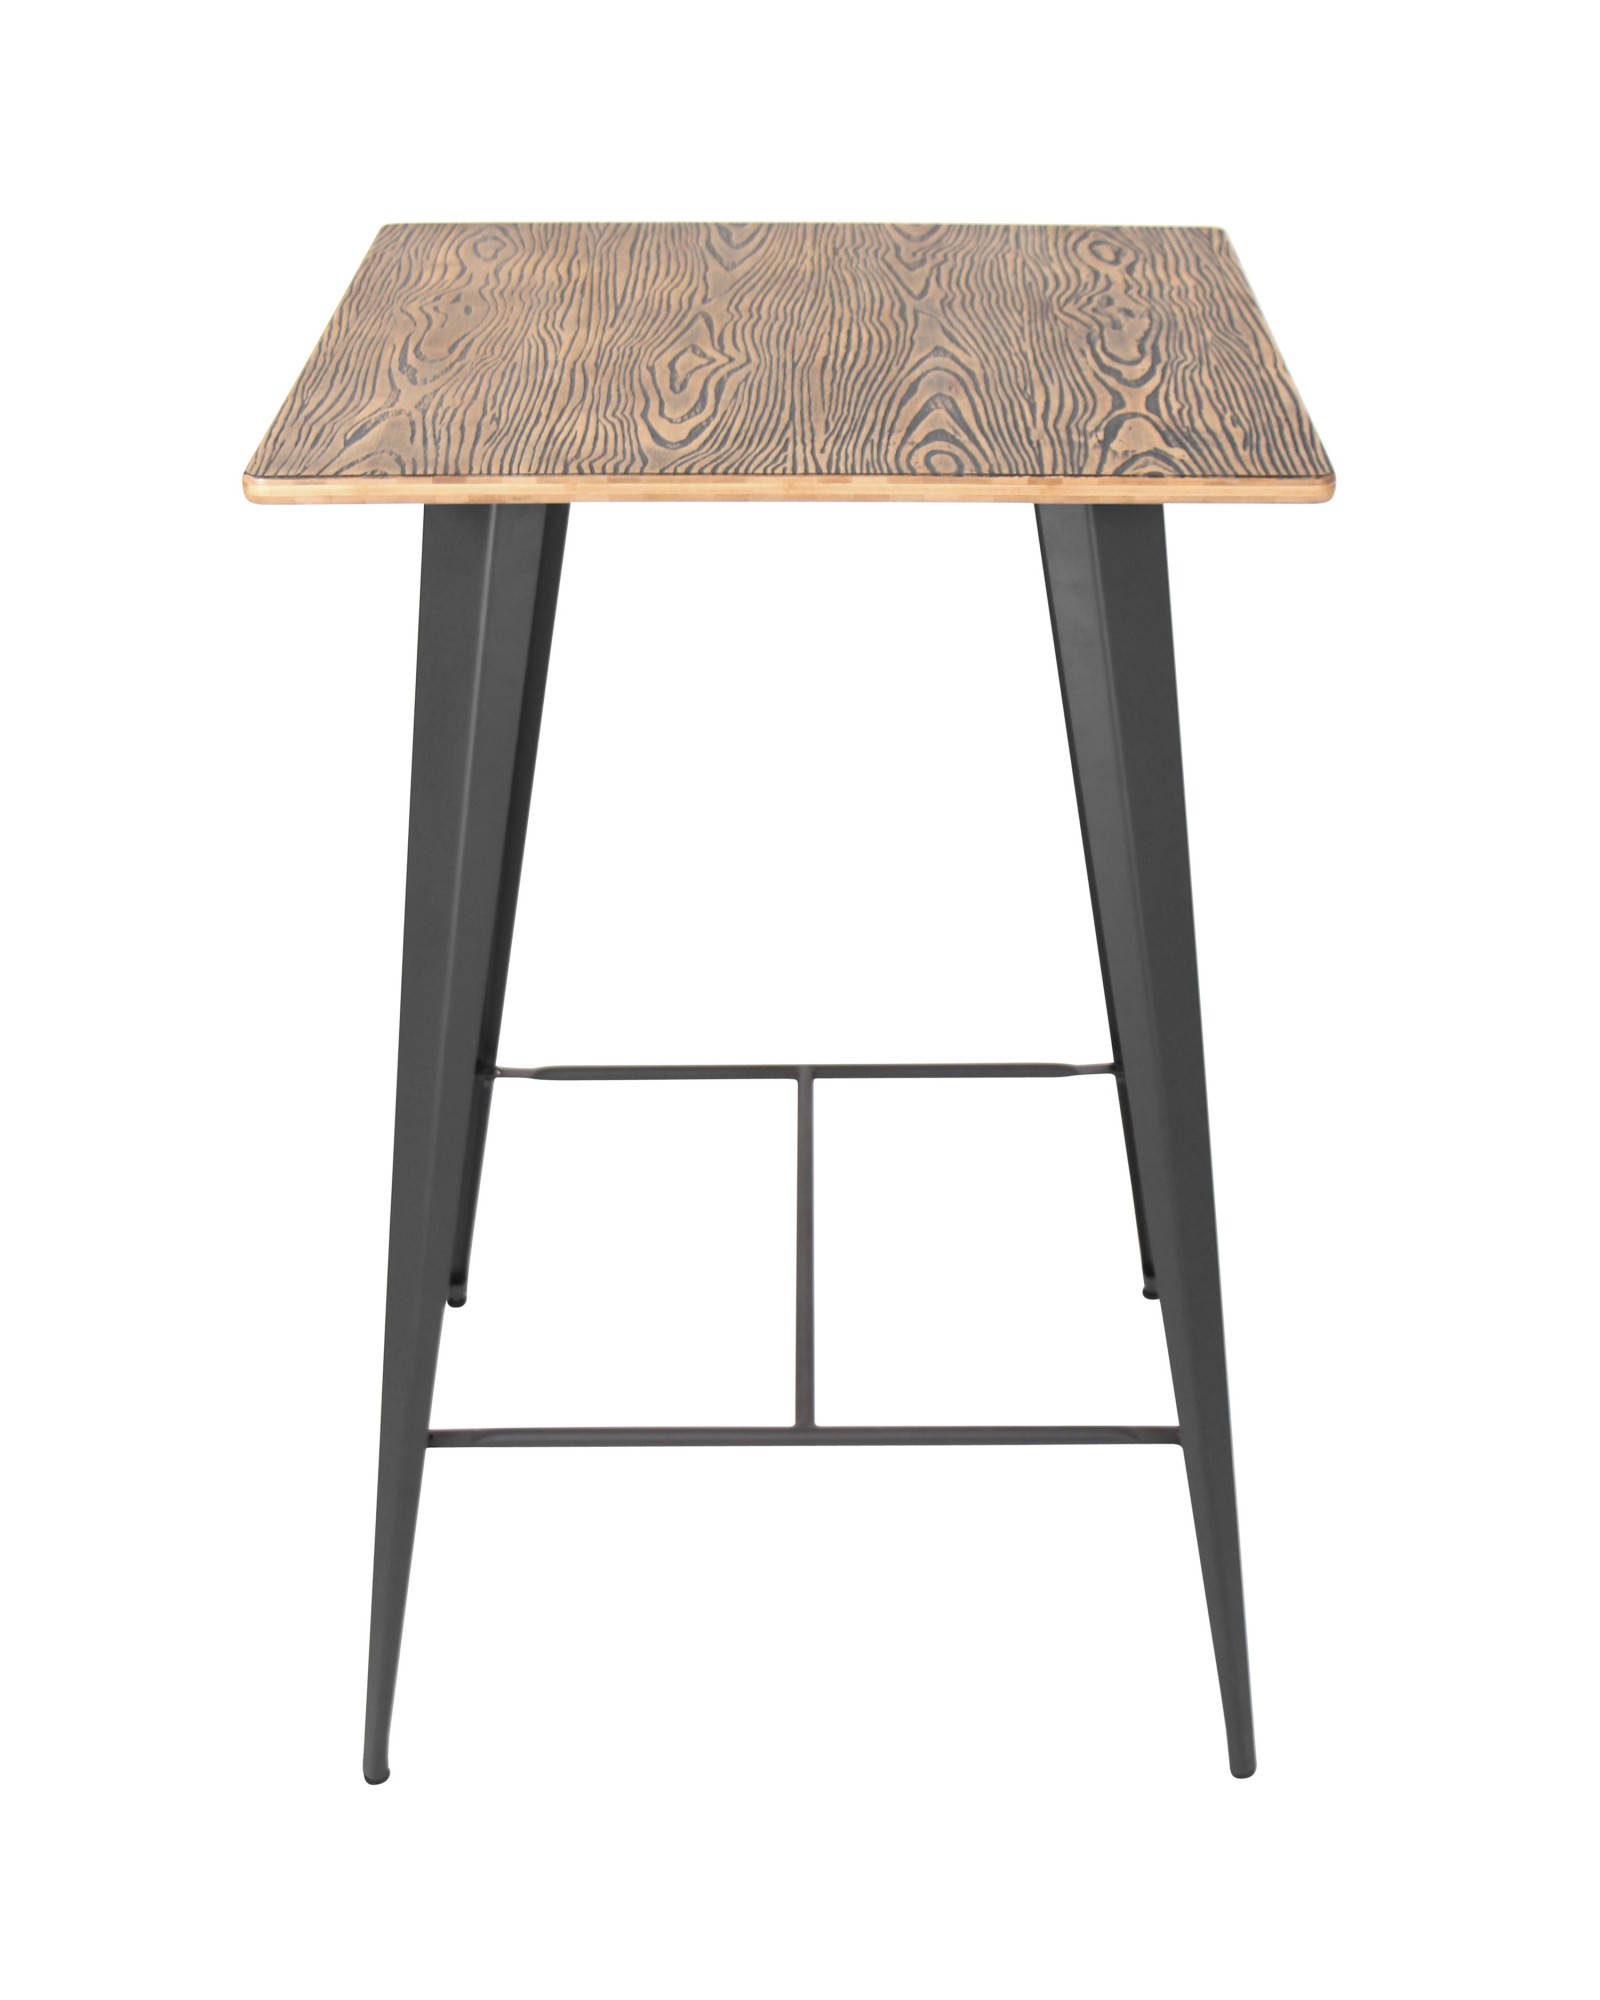 Oregon Industrial Table in Grey and Brown LumiSource